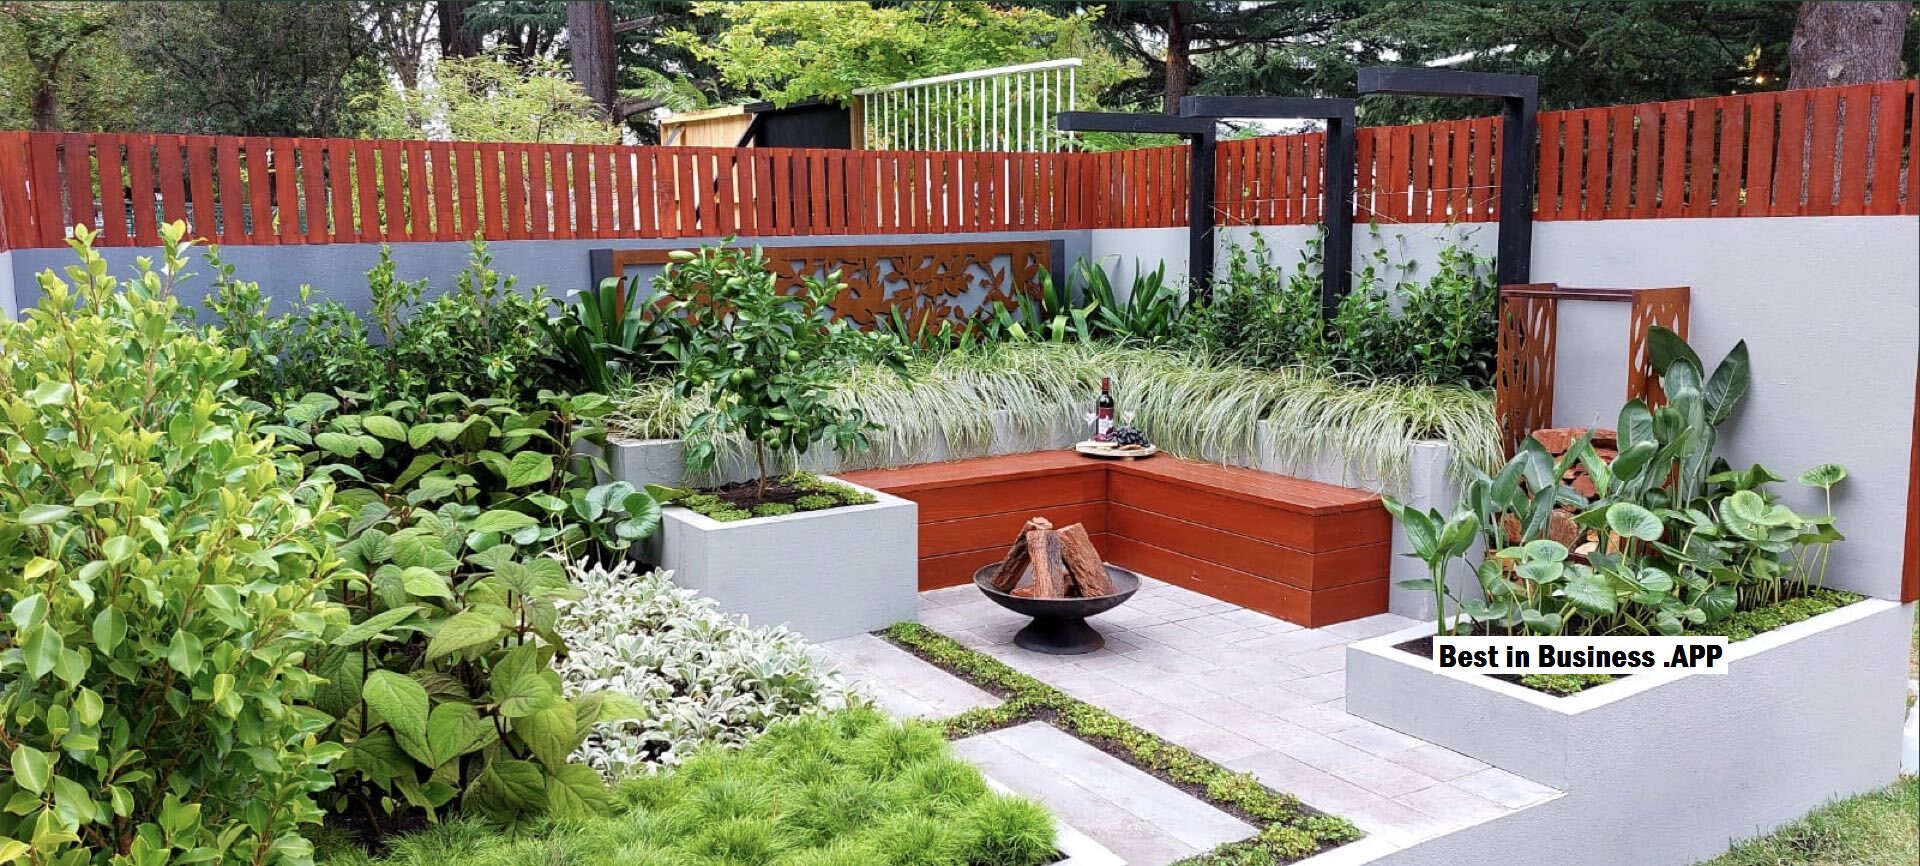 Things To Consider While Hiring Landscaping Design Services – Best in Business .App